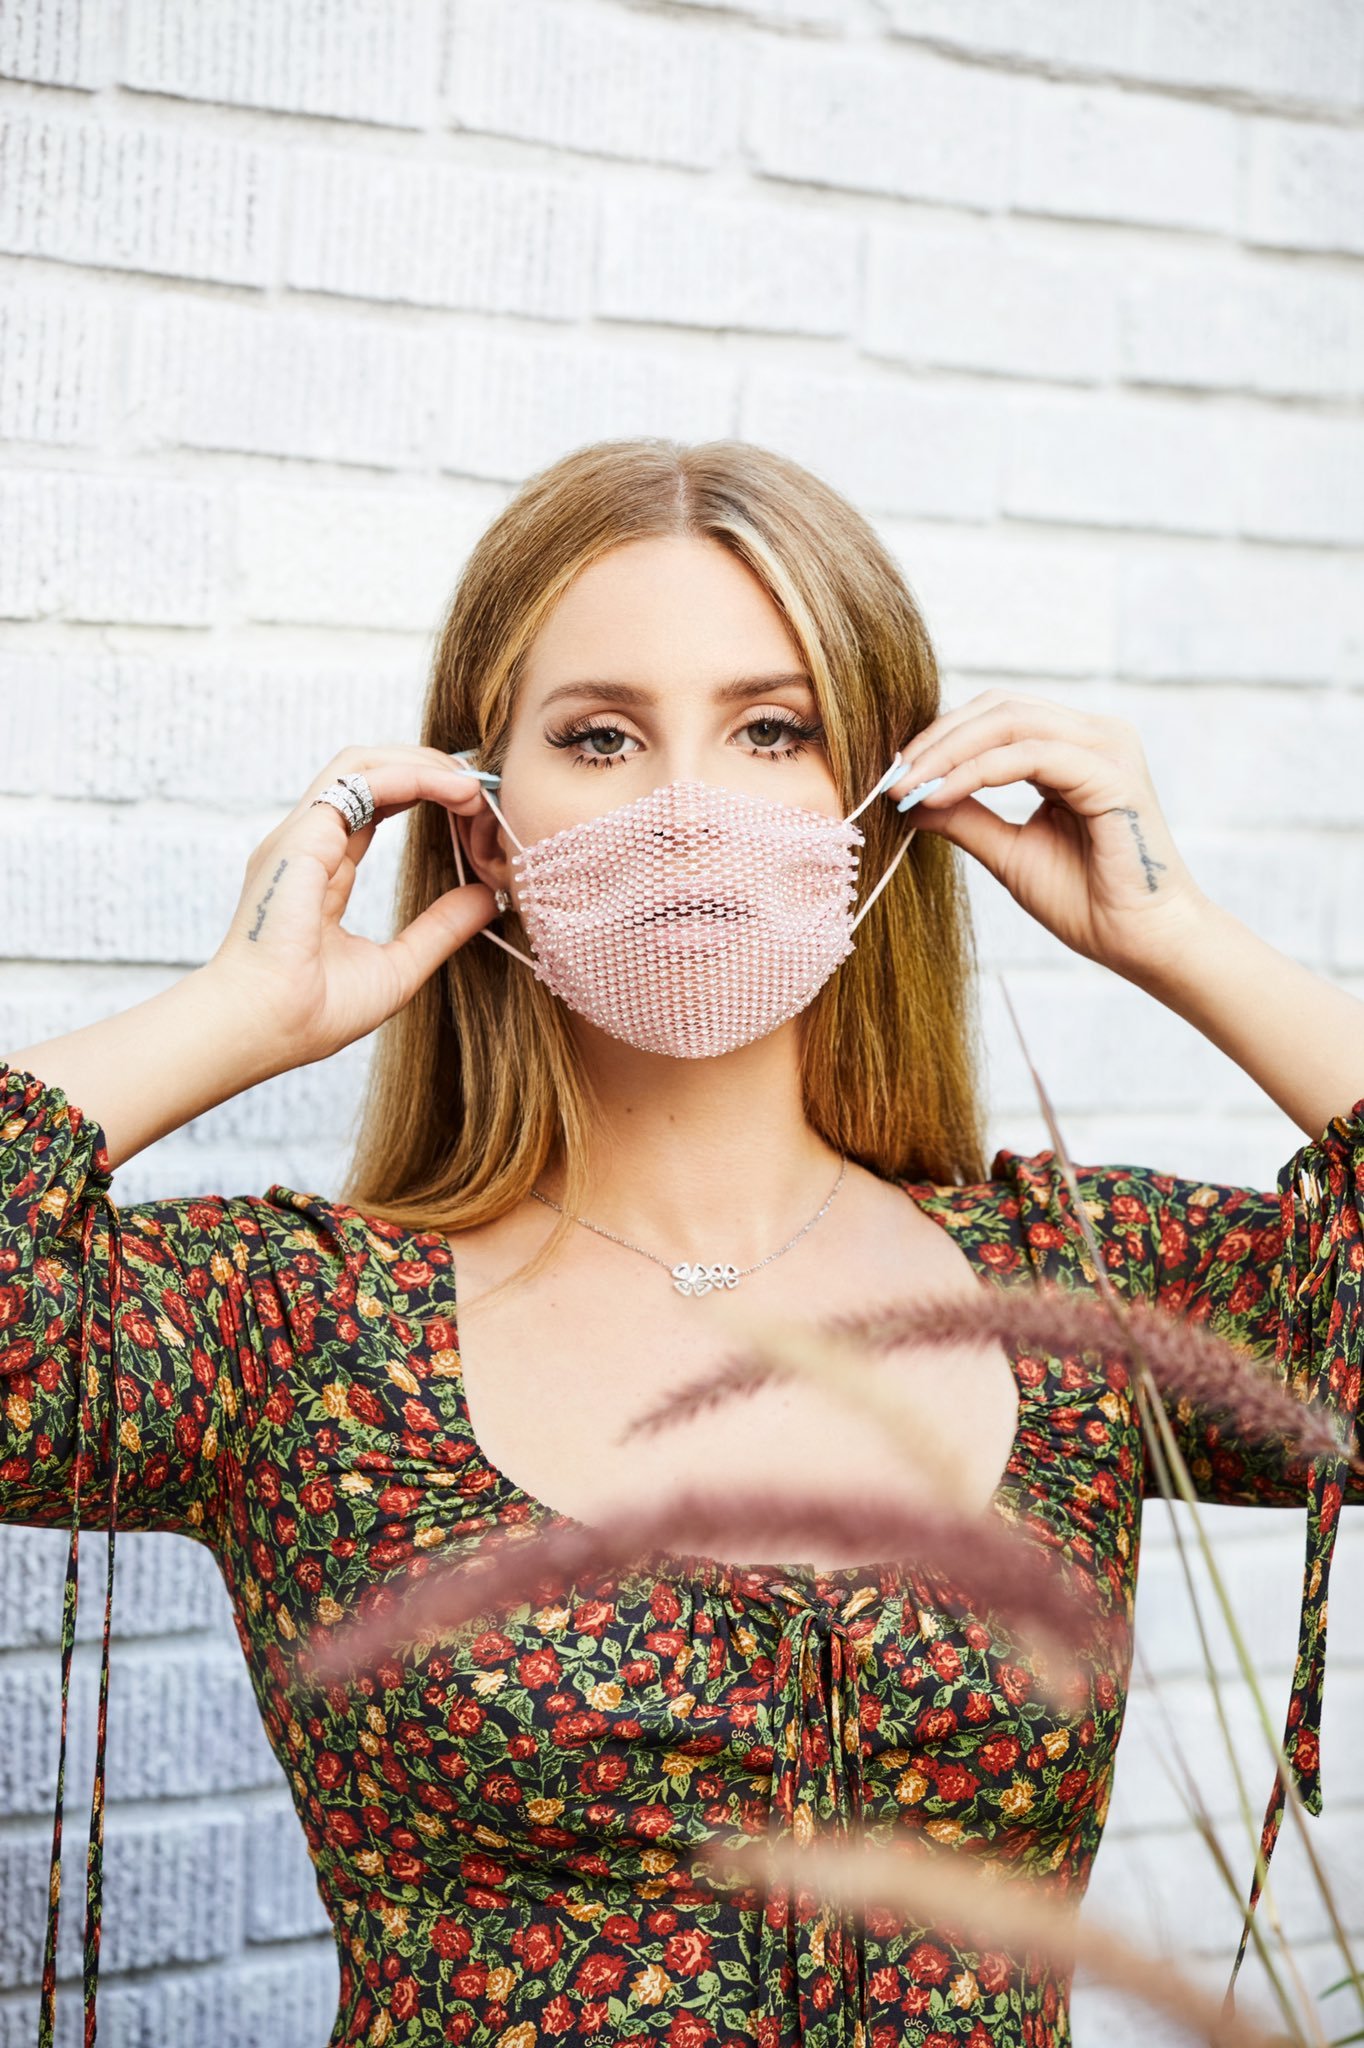 Photos n°2 : Lana Del Ray’s Effective Face Mask!